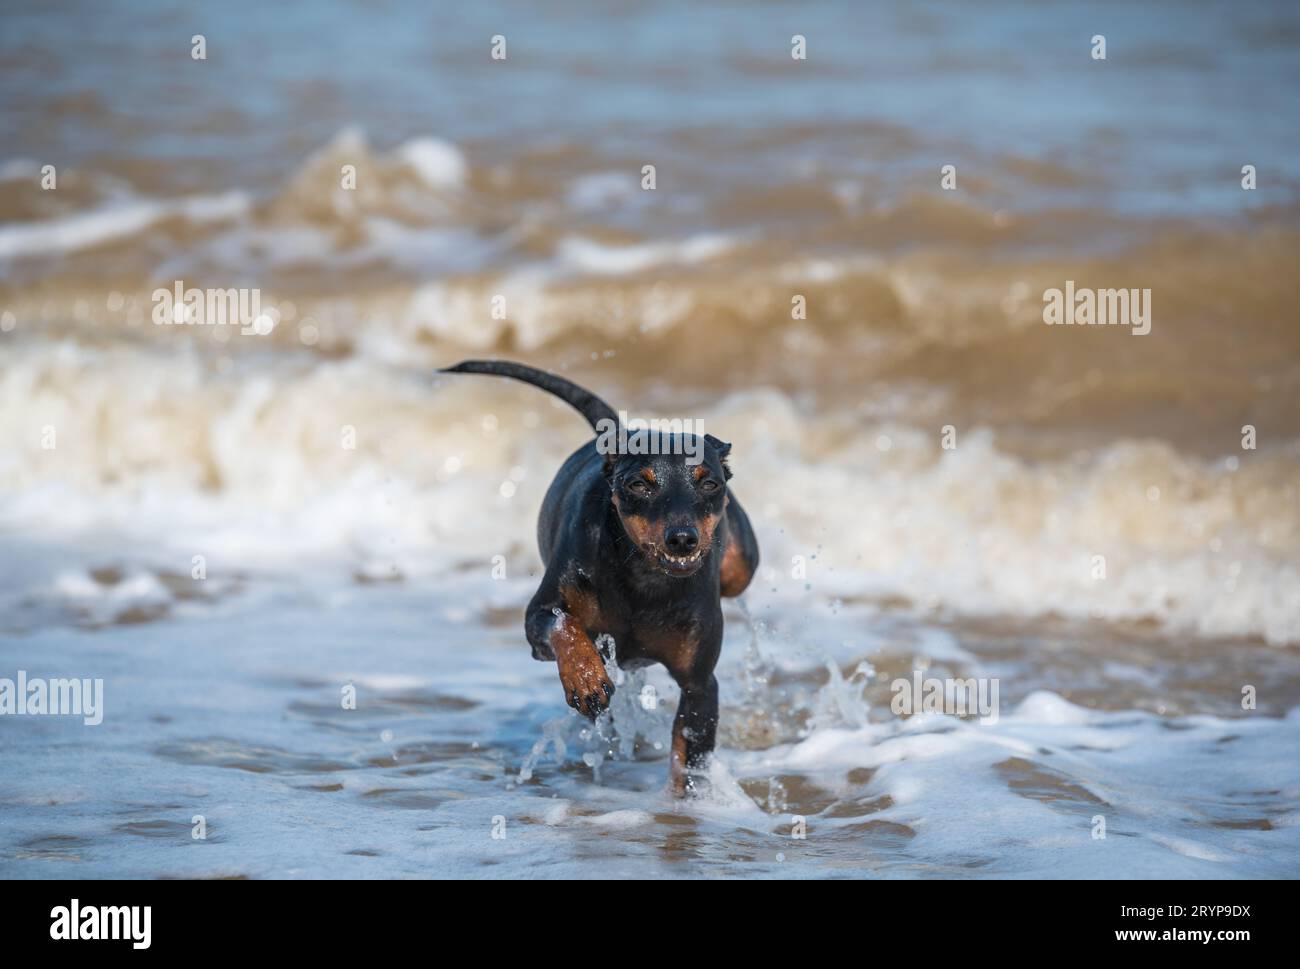 Doberman dog puppy swims in dirty water during a flood Stock Photo